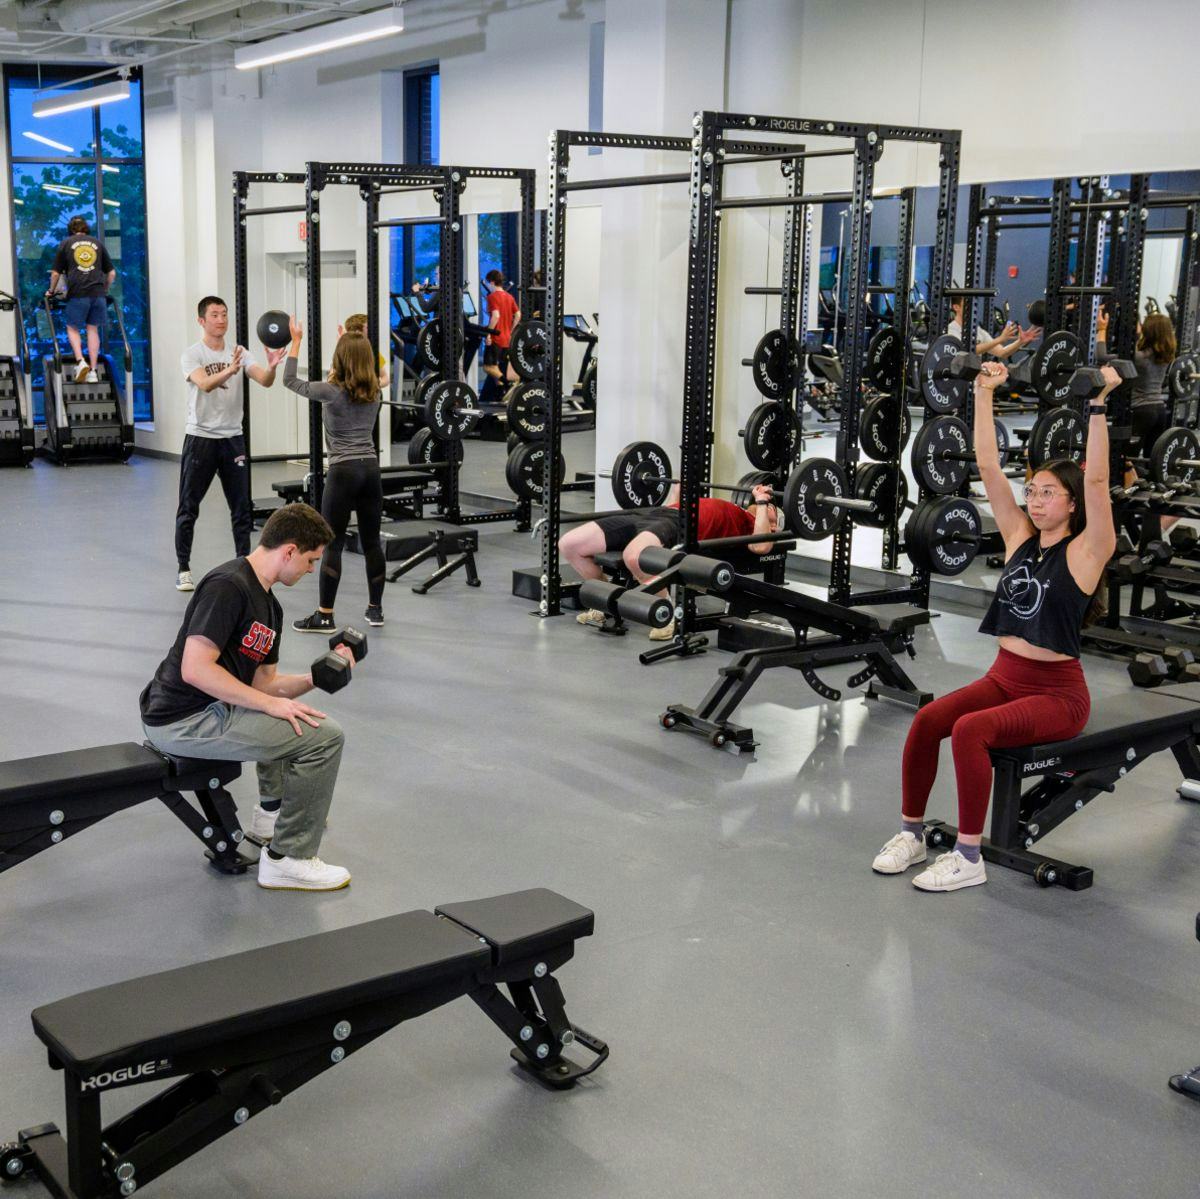 Students lift weights in the fitness room.